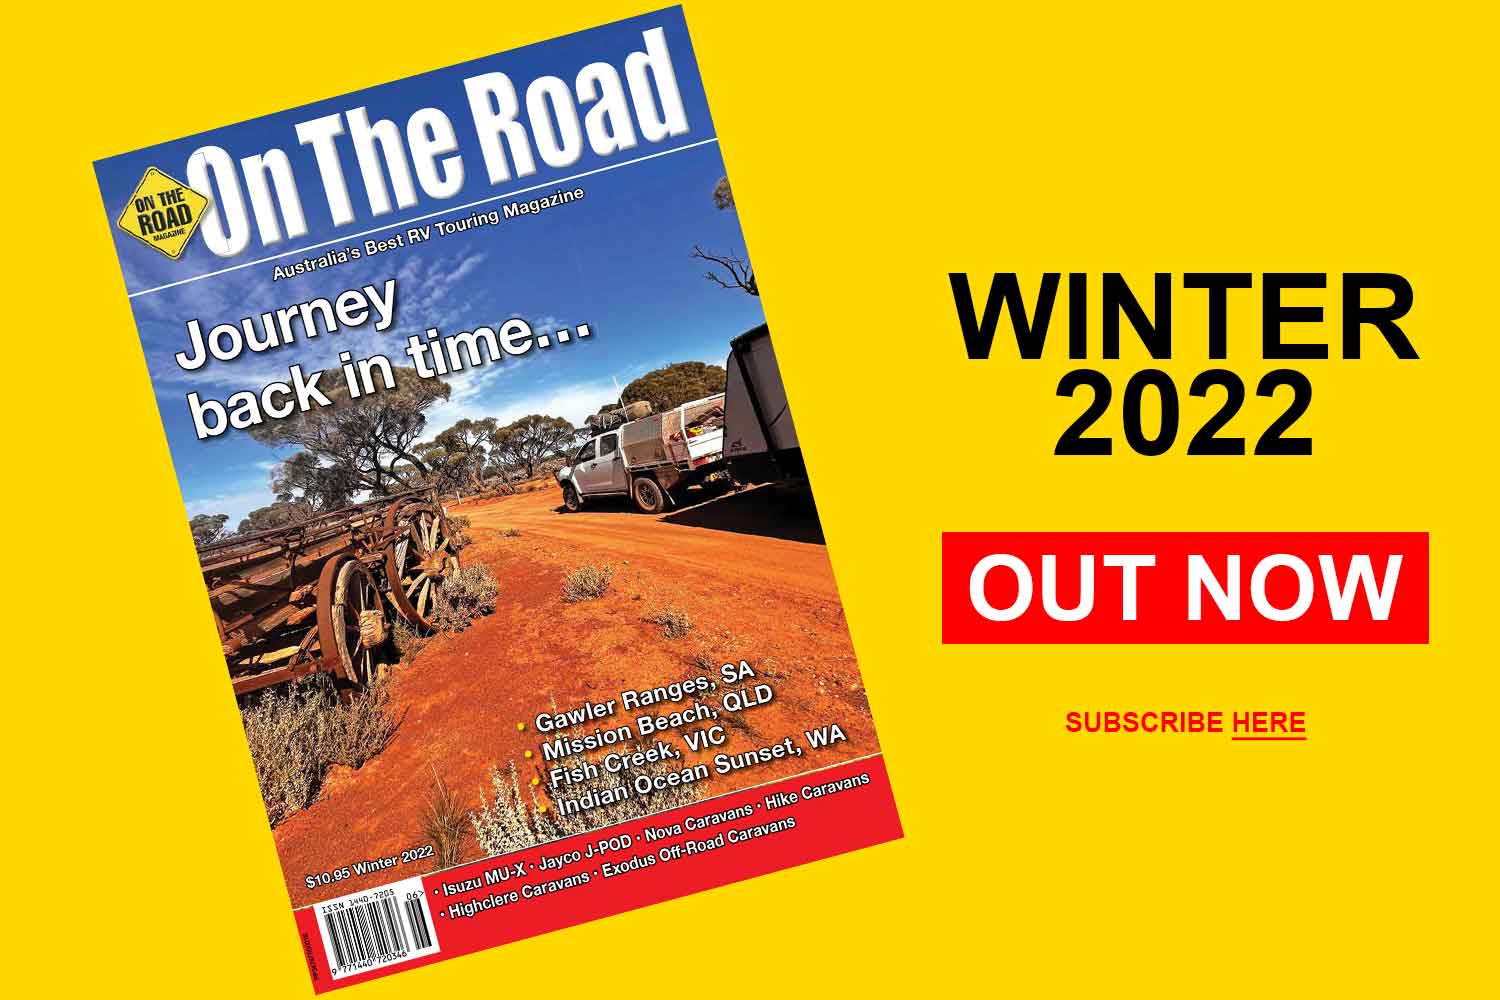 On The Road Magazine - Subscribe Now